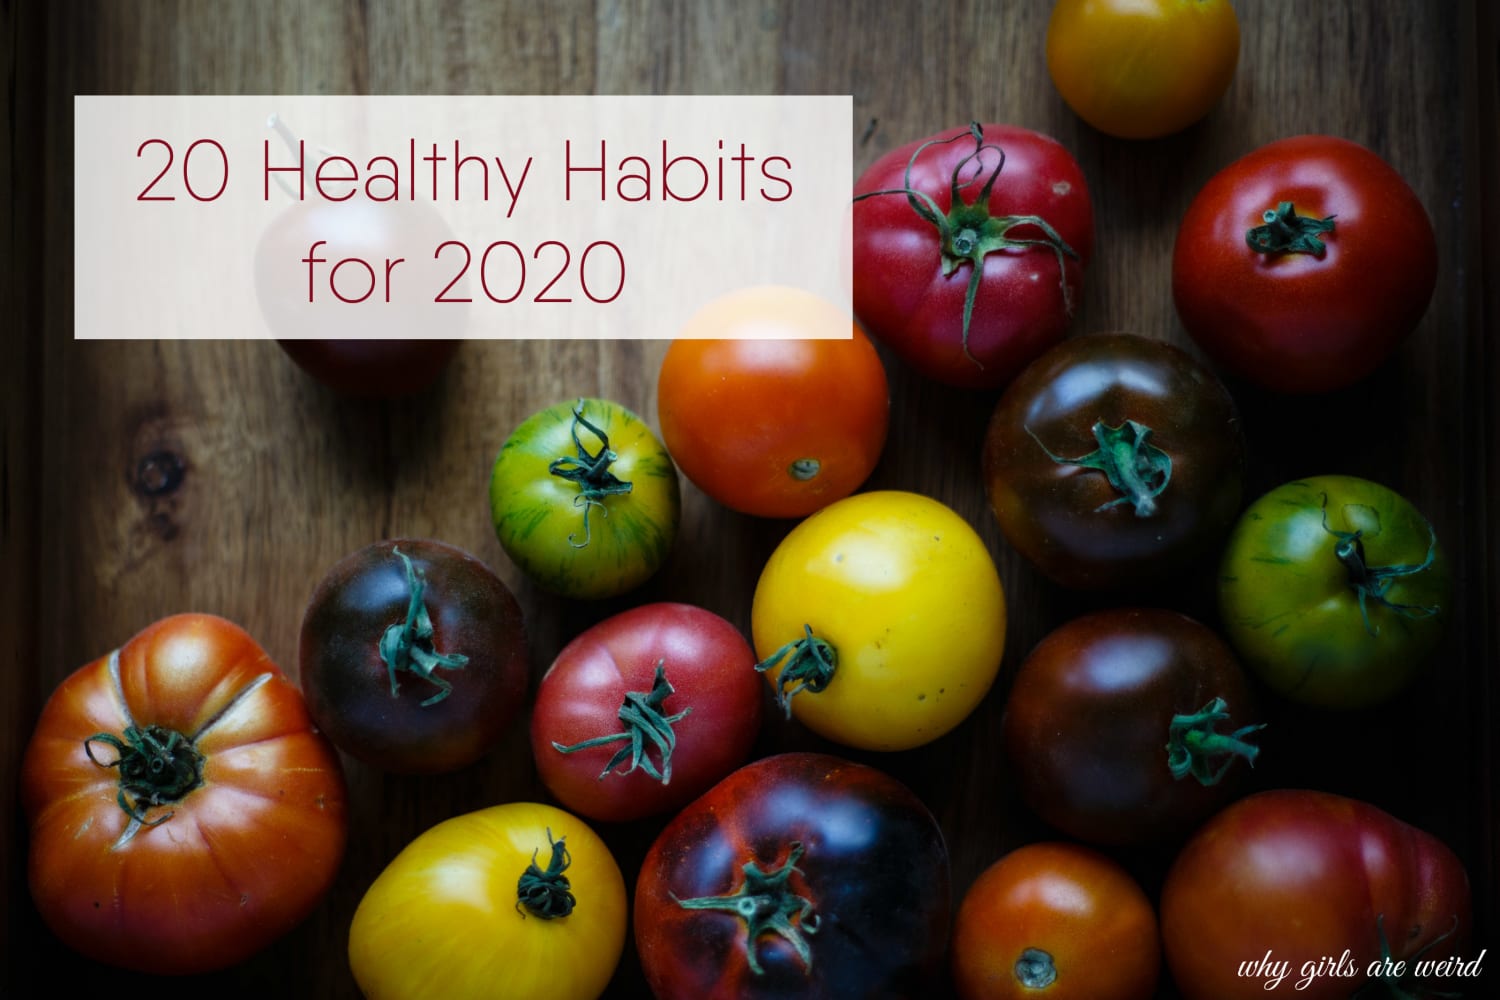 20 Healthy Habits for 2020